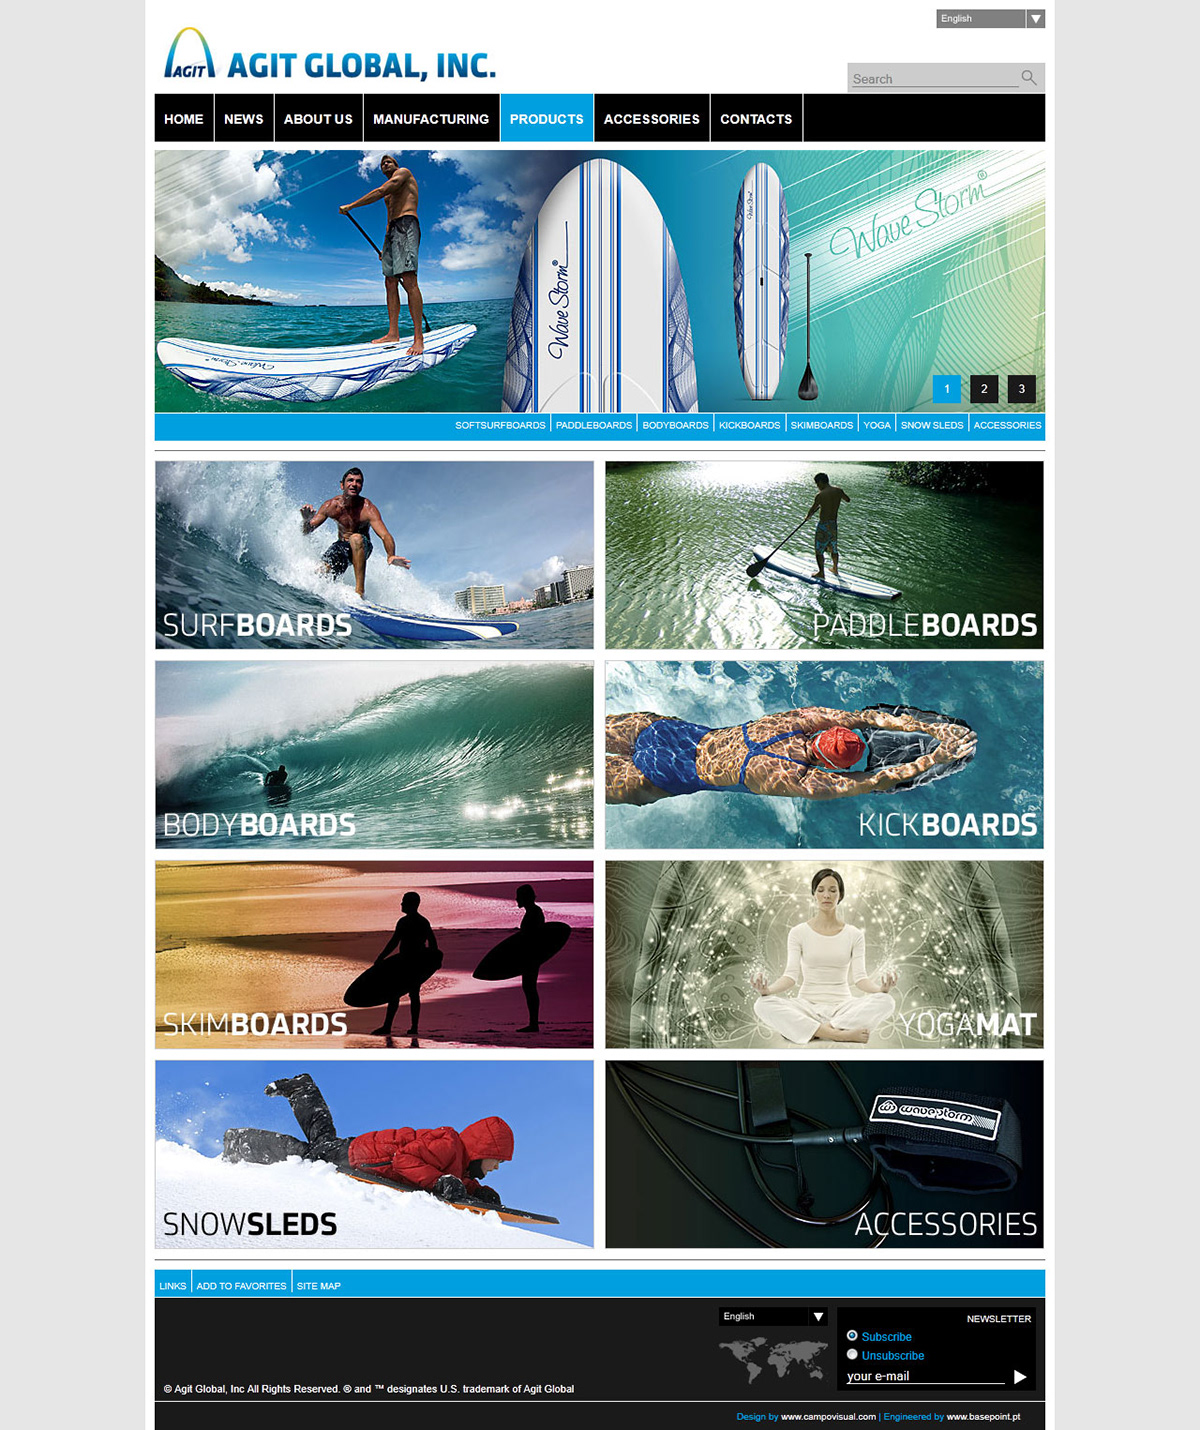 Wave Storm WaveStorm Agit Global Campo Visual Inc Surf Bodyboard Watersports brands no.6 campovisual Pedro Costa manufacturing action sports Sleds Sno-Storm Strom Blade Ozo Boards John Yeh Jarrod Gibson Webdesign Website kickboards Paddleboards sup Skimboards yoga mat Earthskin accessories